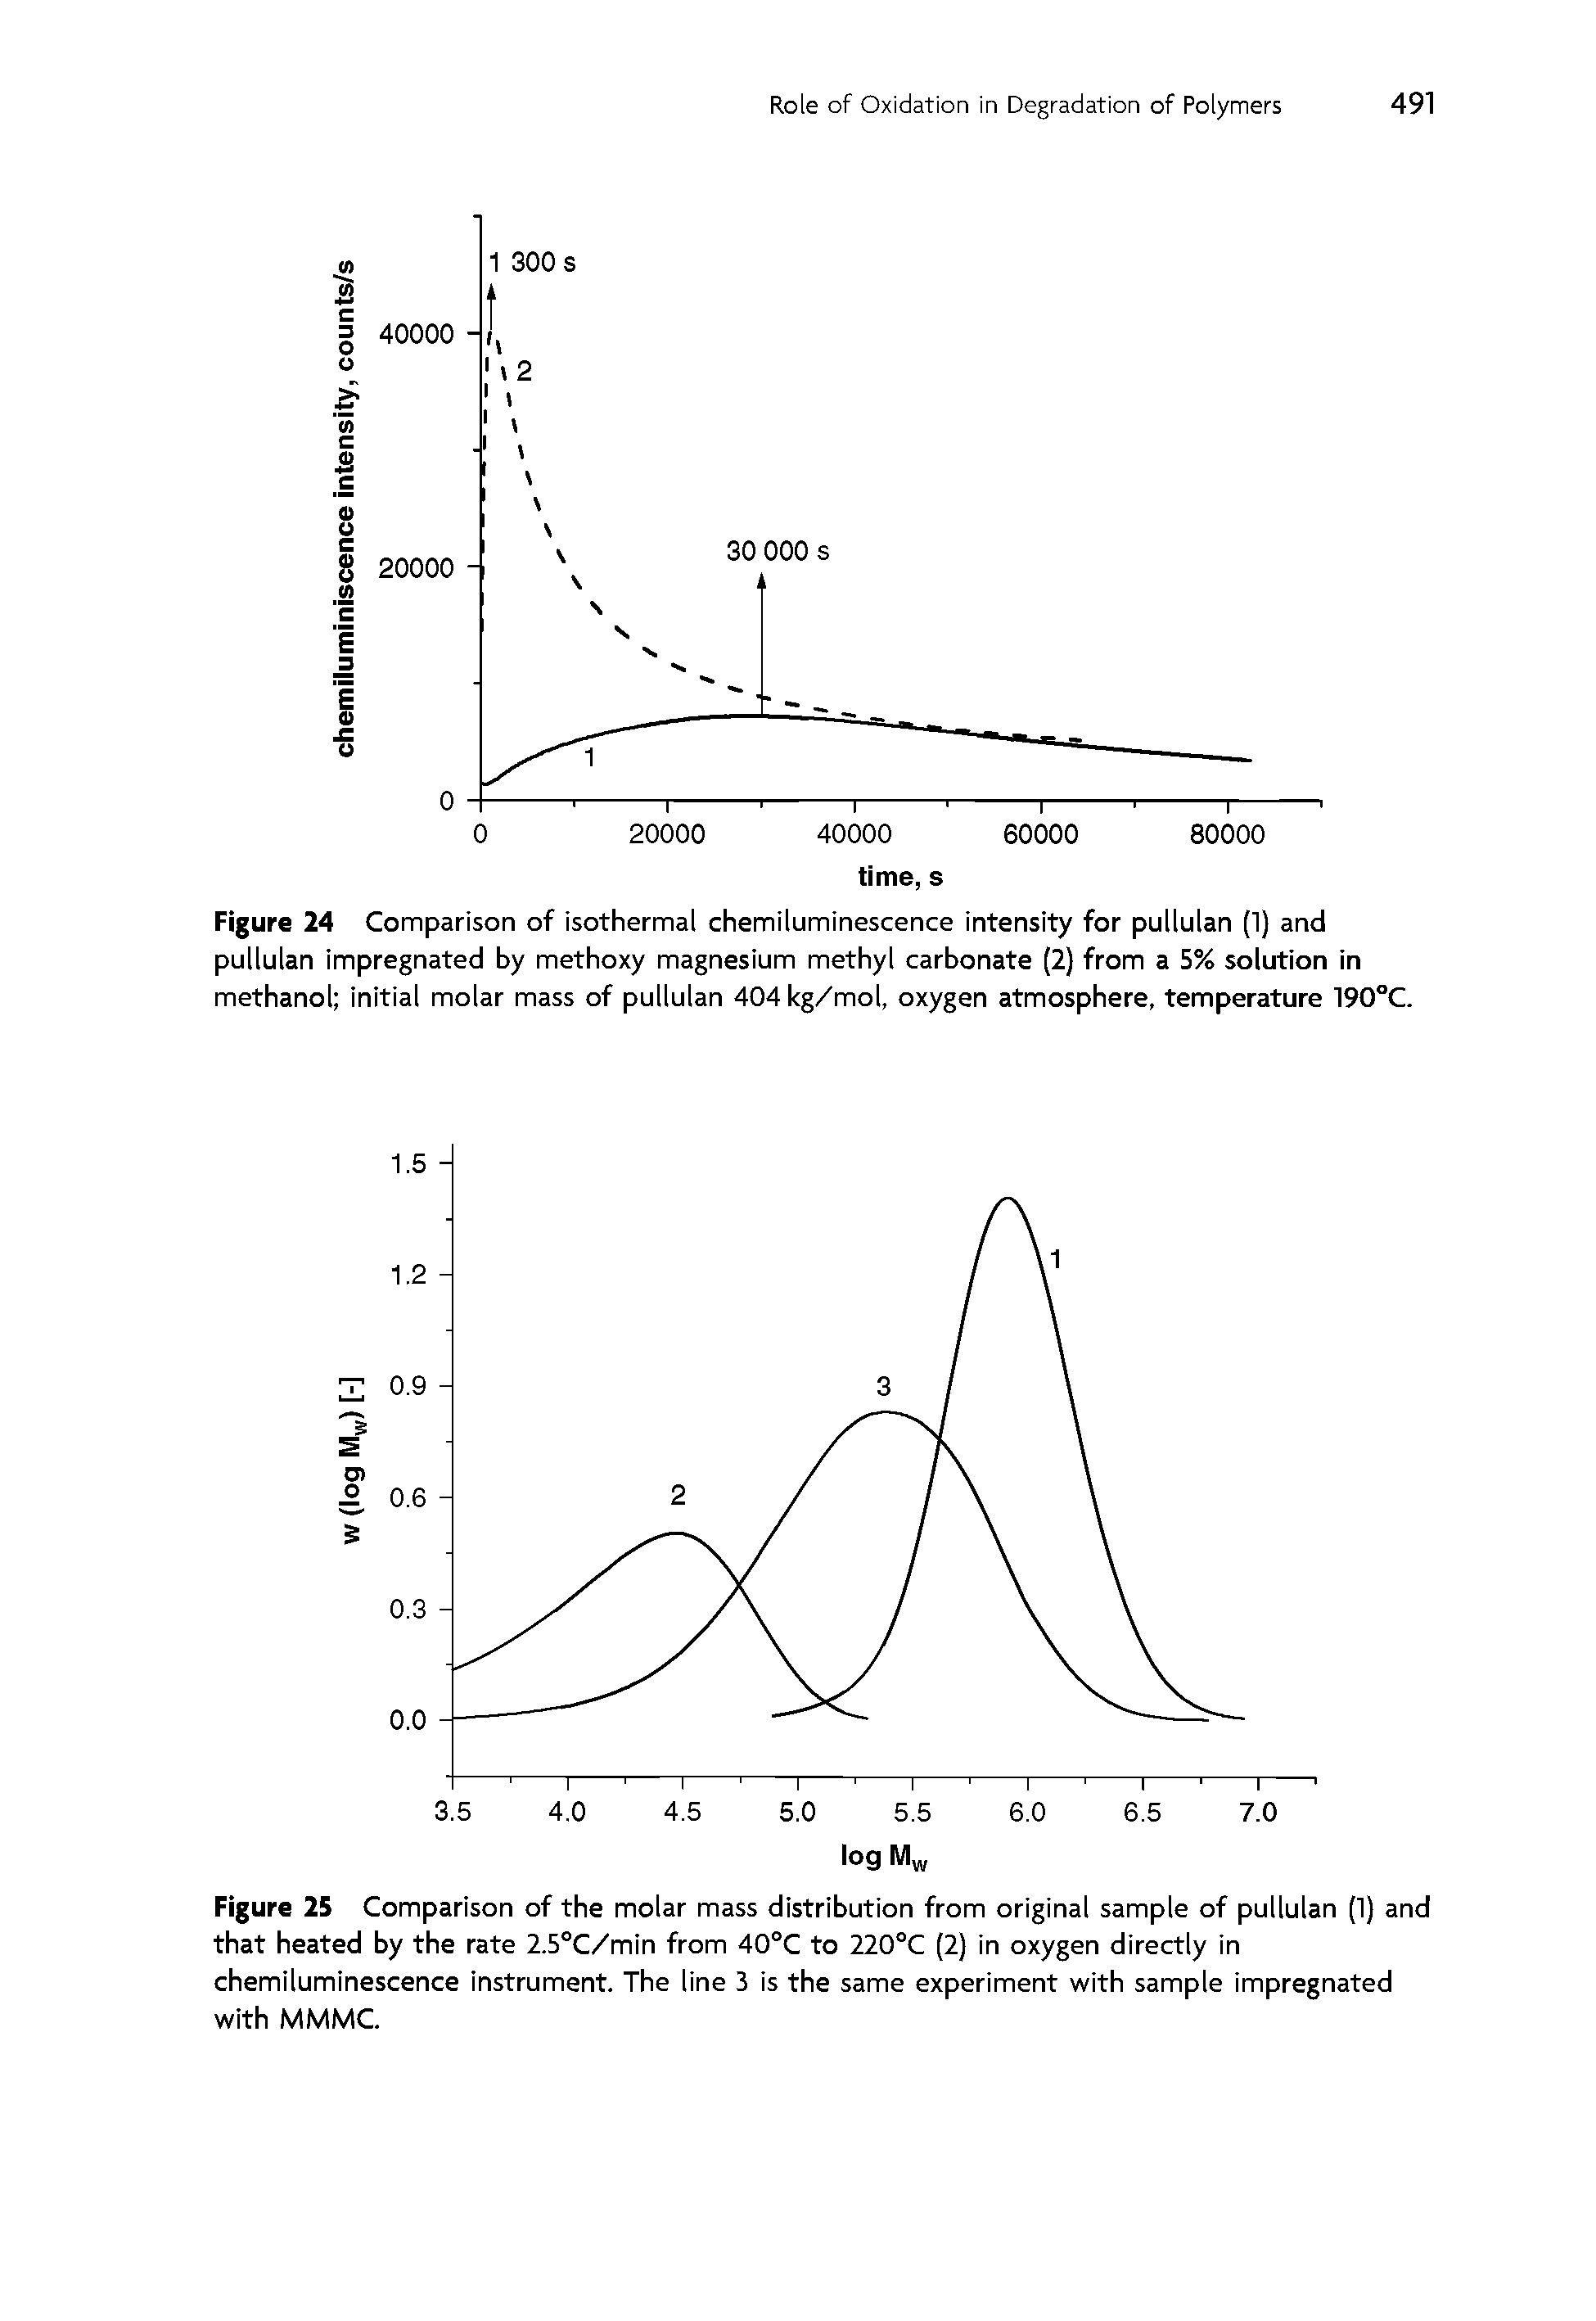 Figure 25 Comparison of the molar mass distribution from original sample of pullulan (1) and that heated by the rate 2.5°C/min from 40°C to 220°C (2) in oxygen directly in chemiluminescence instrument. The line 3 is the same experiment with sample impregnated with MMMC.